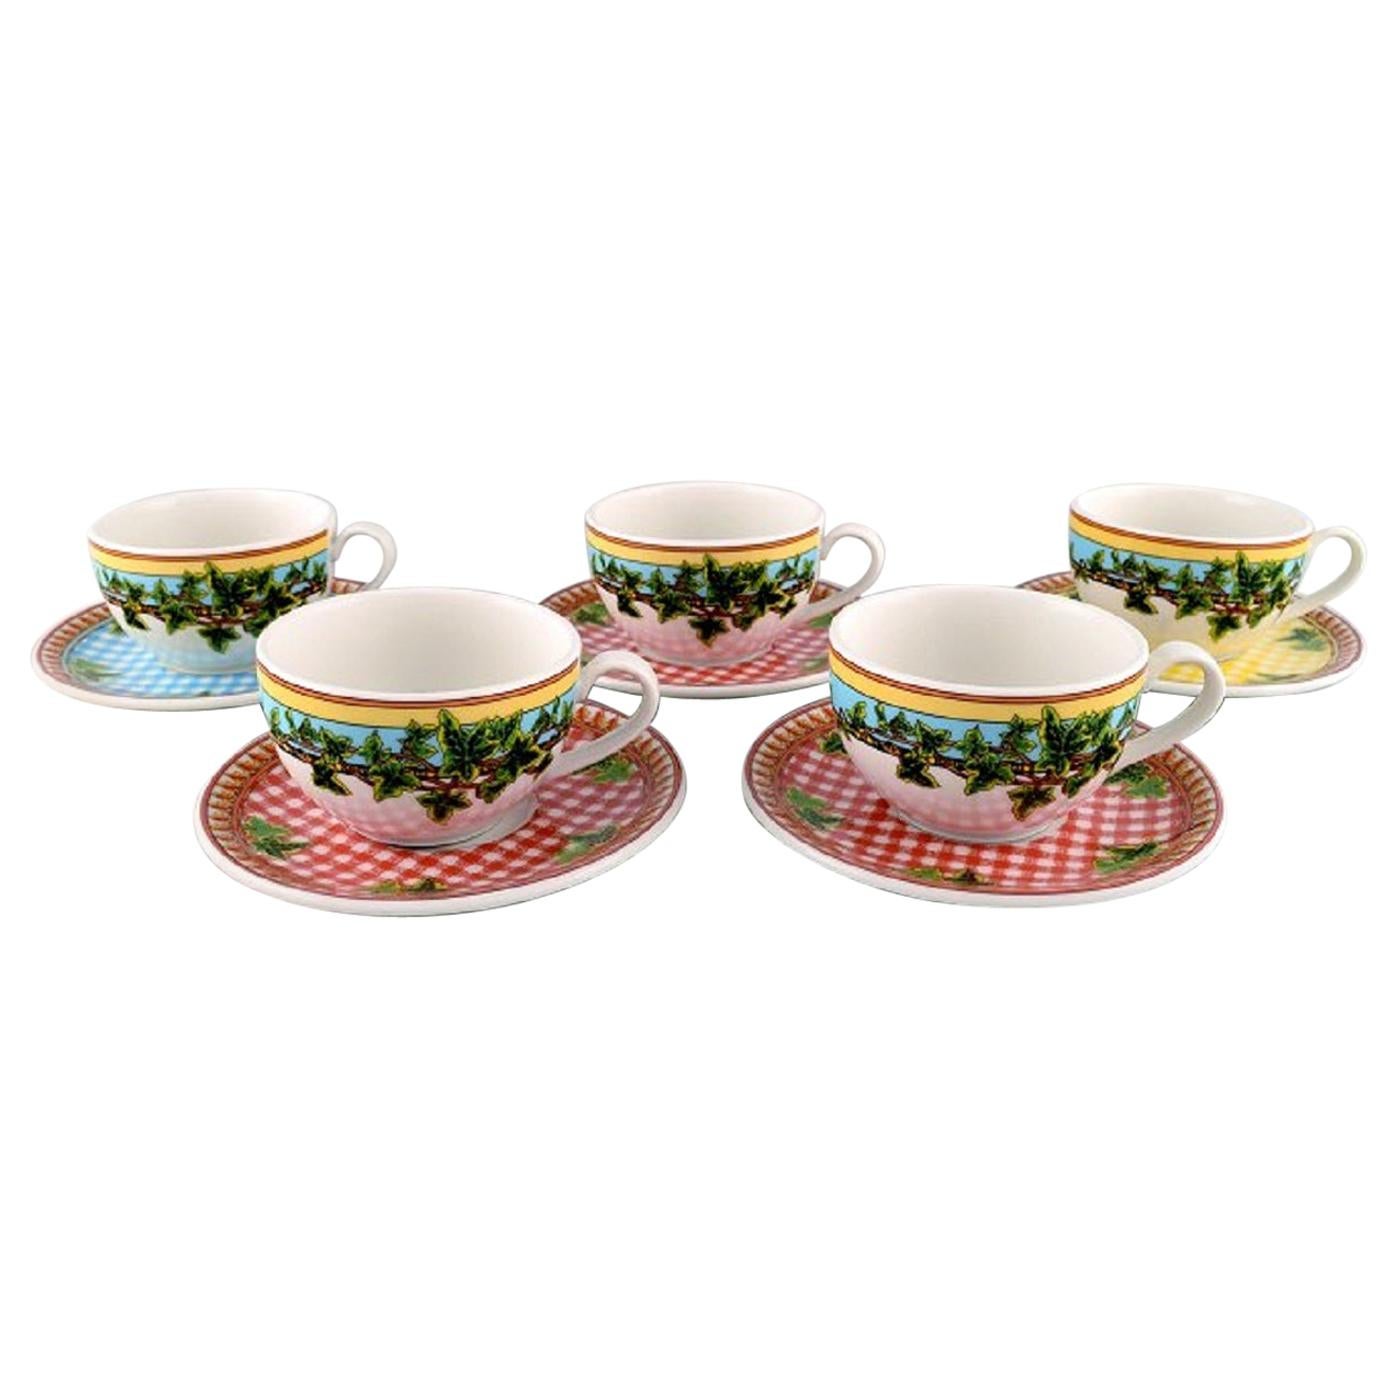 Gianni Versace for Rosenthal, Five Large "Ivy Leaves" Teacups with Saucers